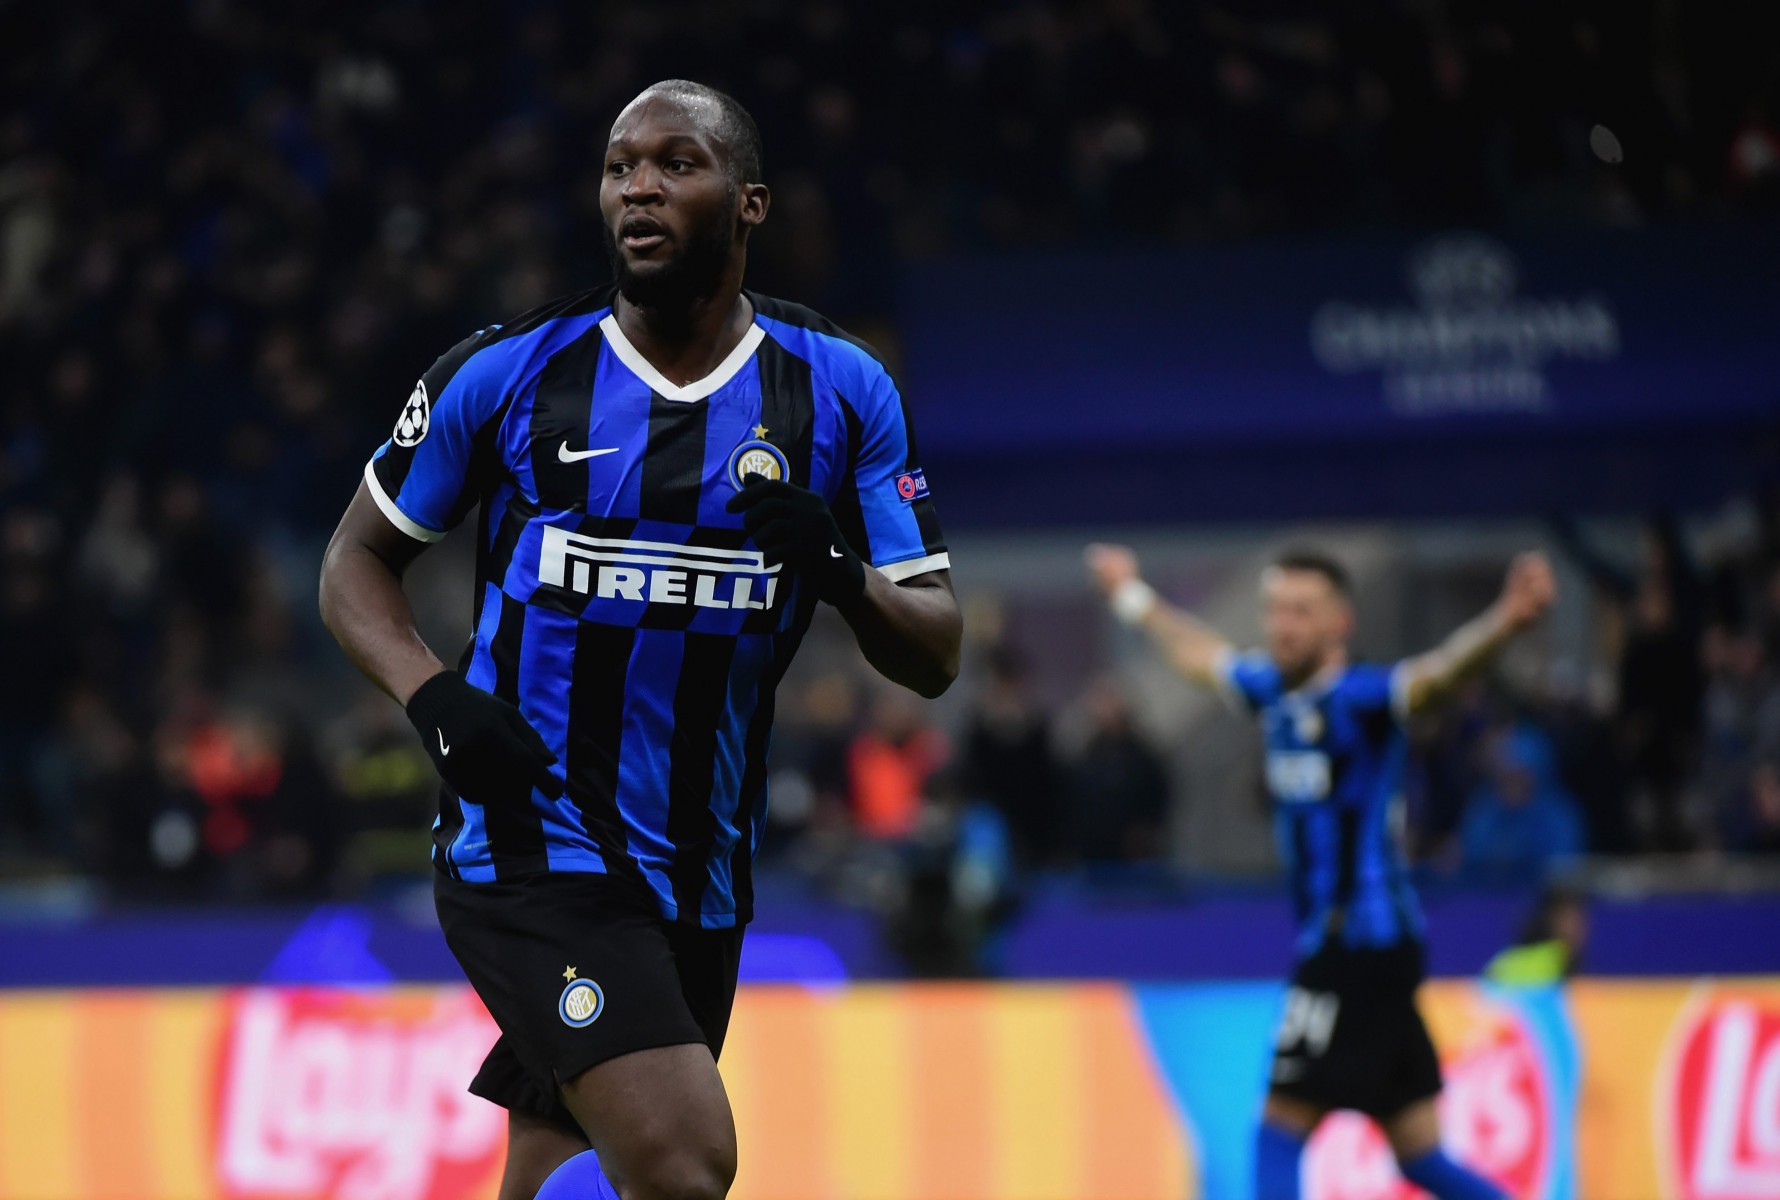 , Lukaku told ex-Man Utd pal Pogba I was done as he got set to leave Old Trafford for Inter Milan transfer